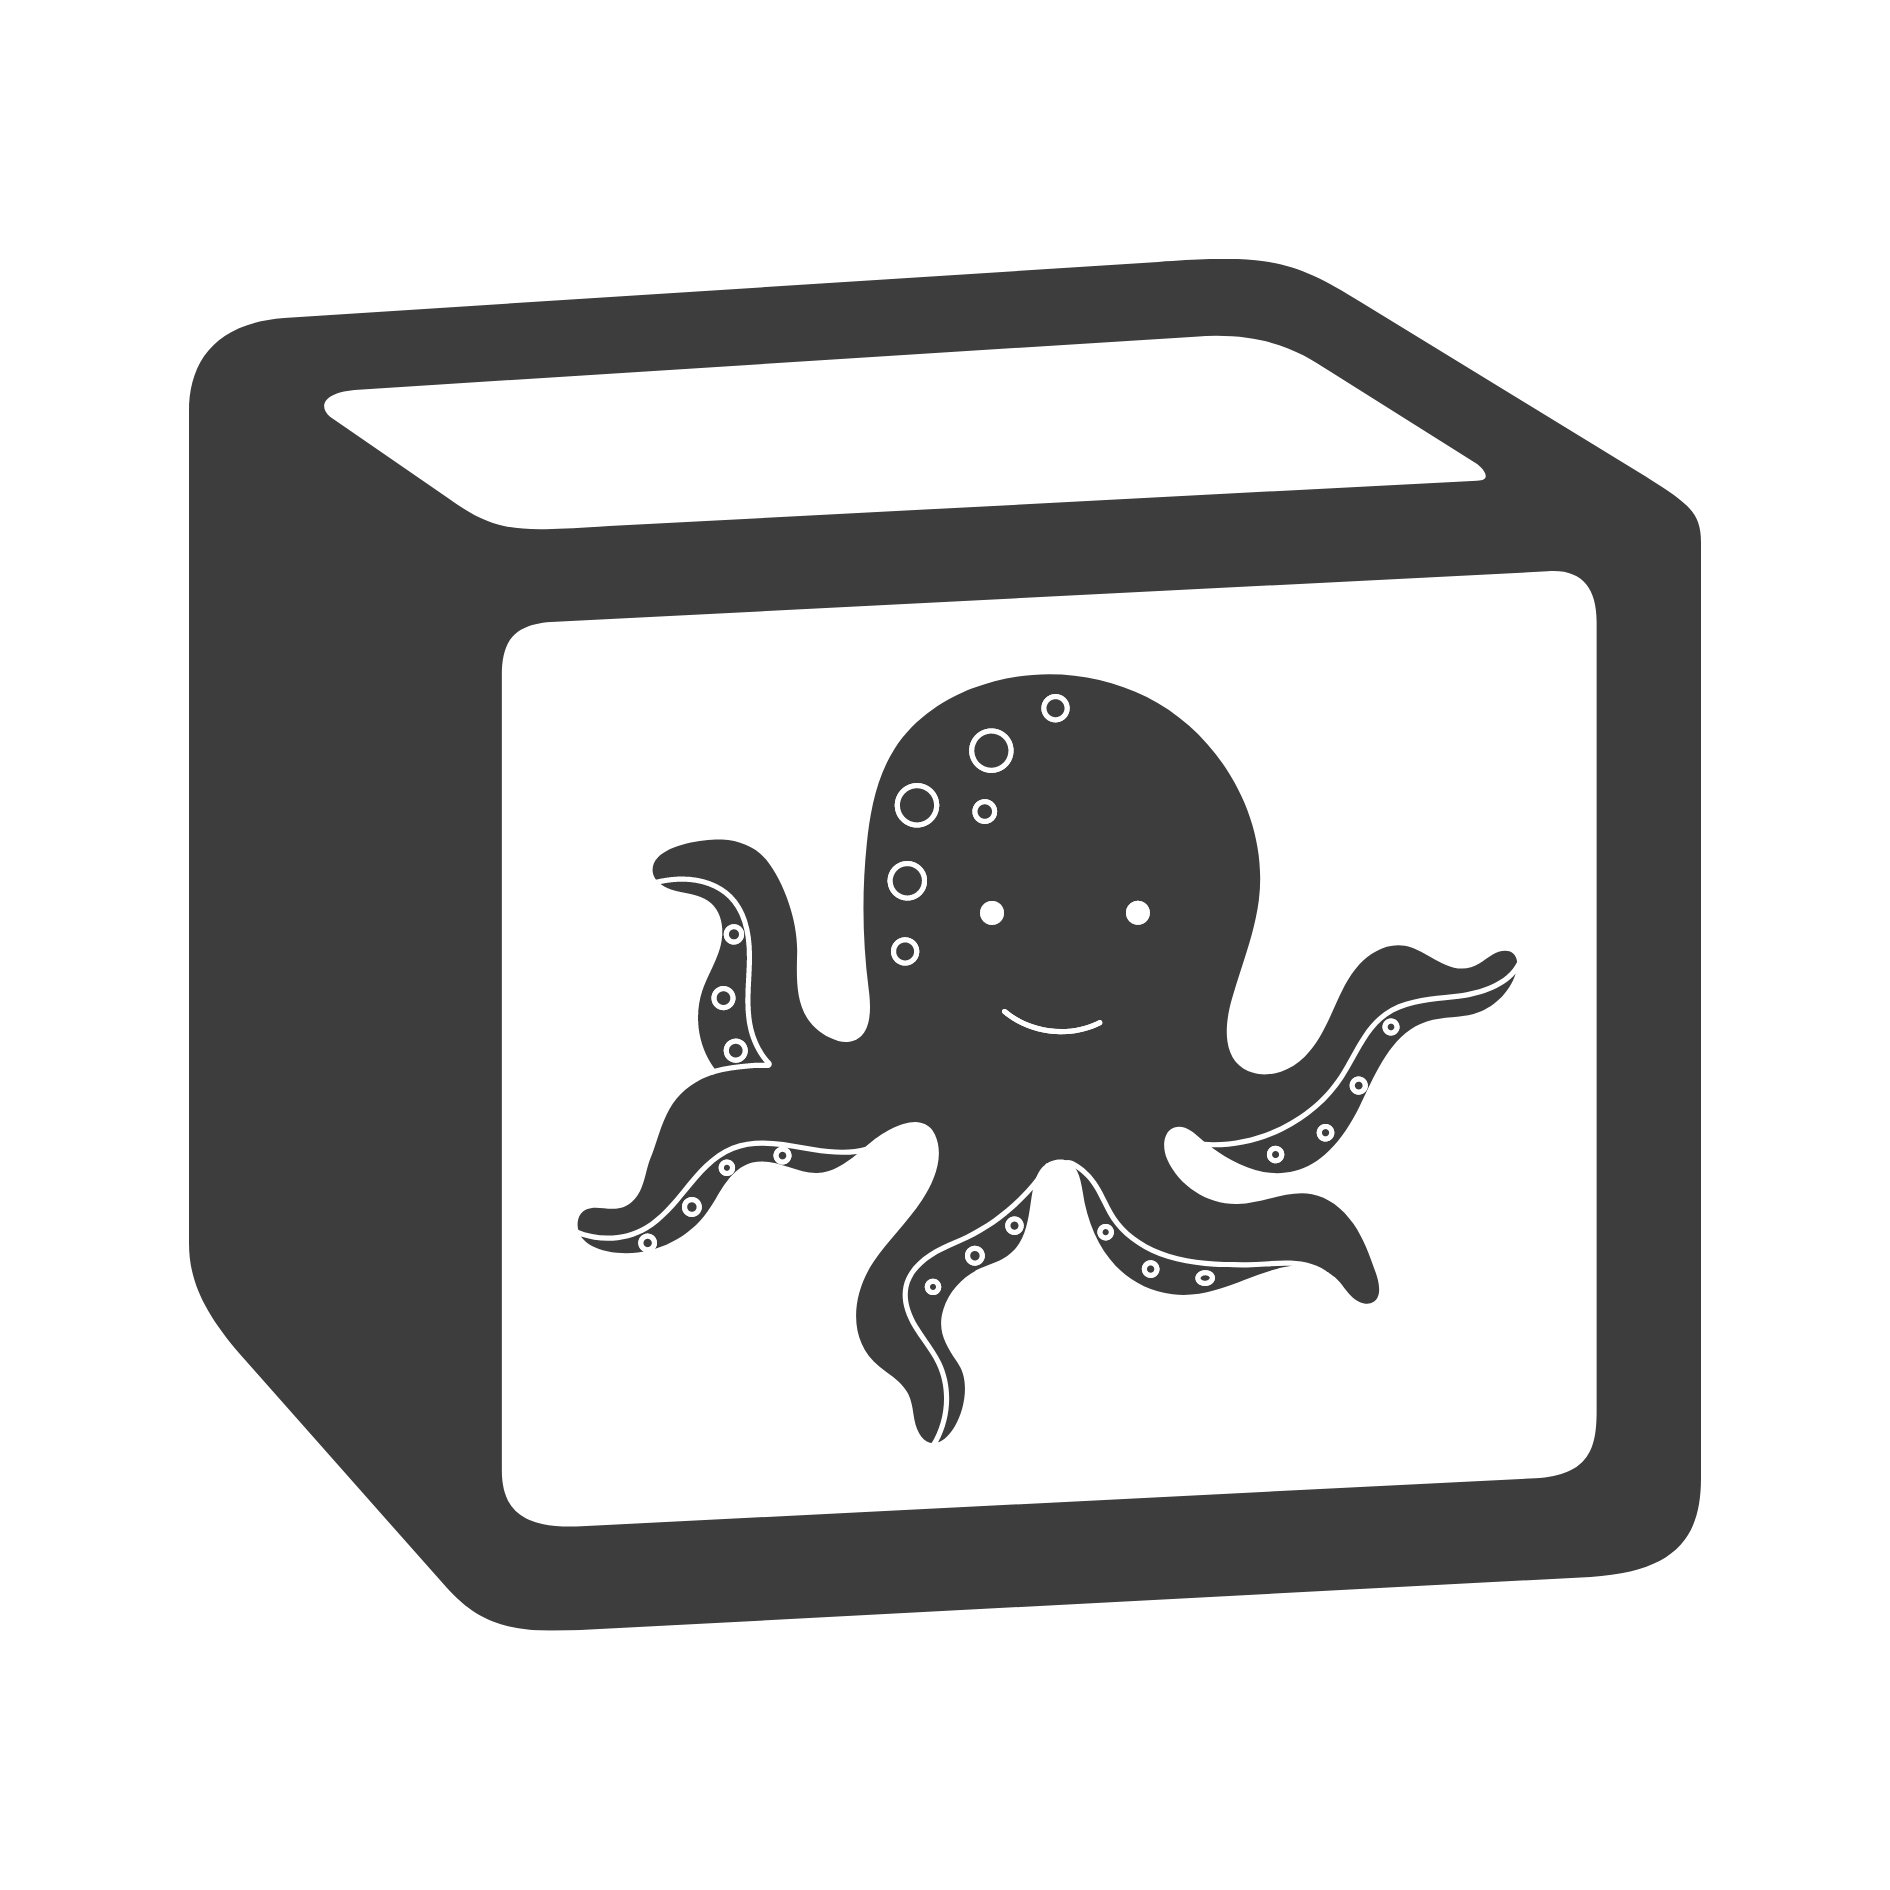 Profile image for notionoctopus